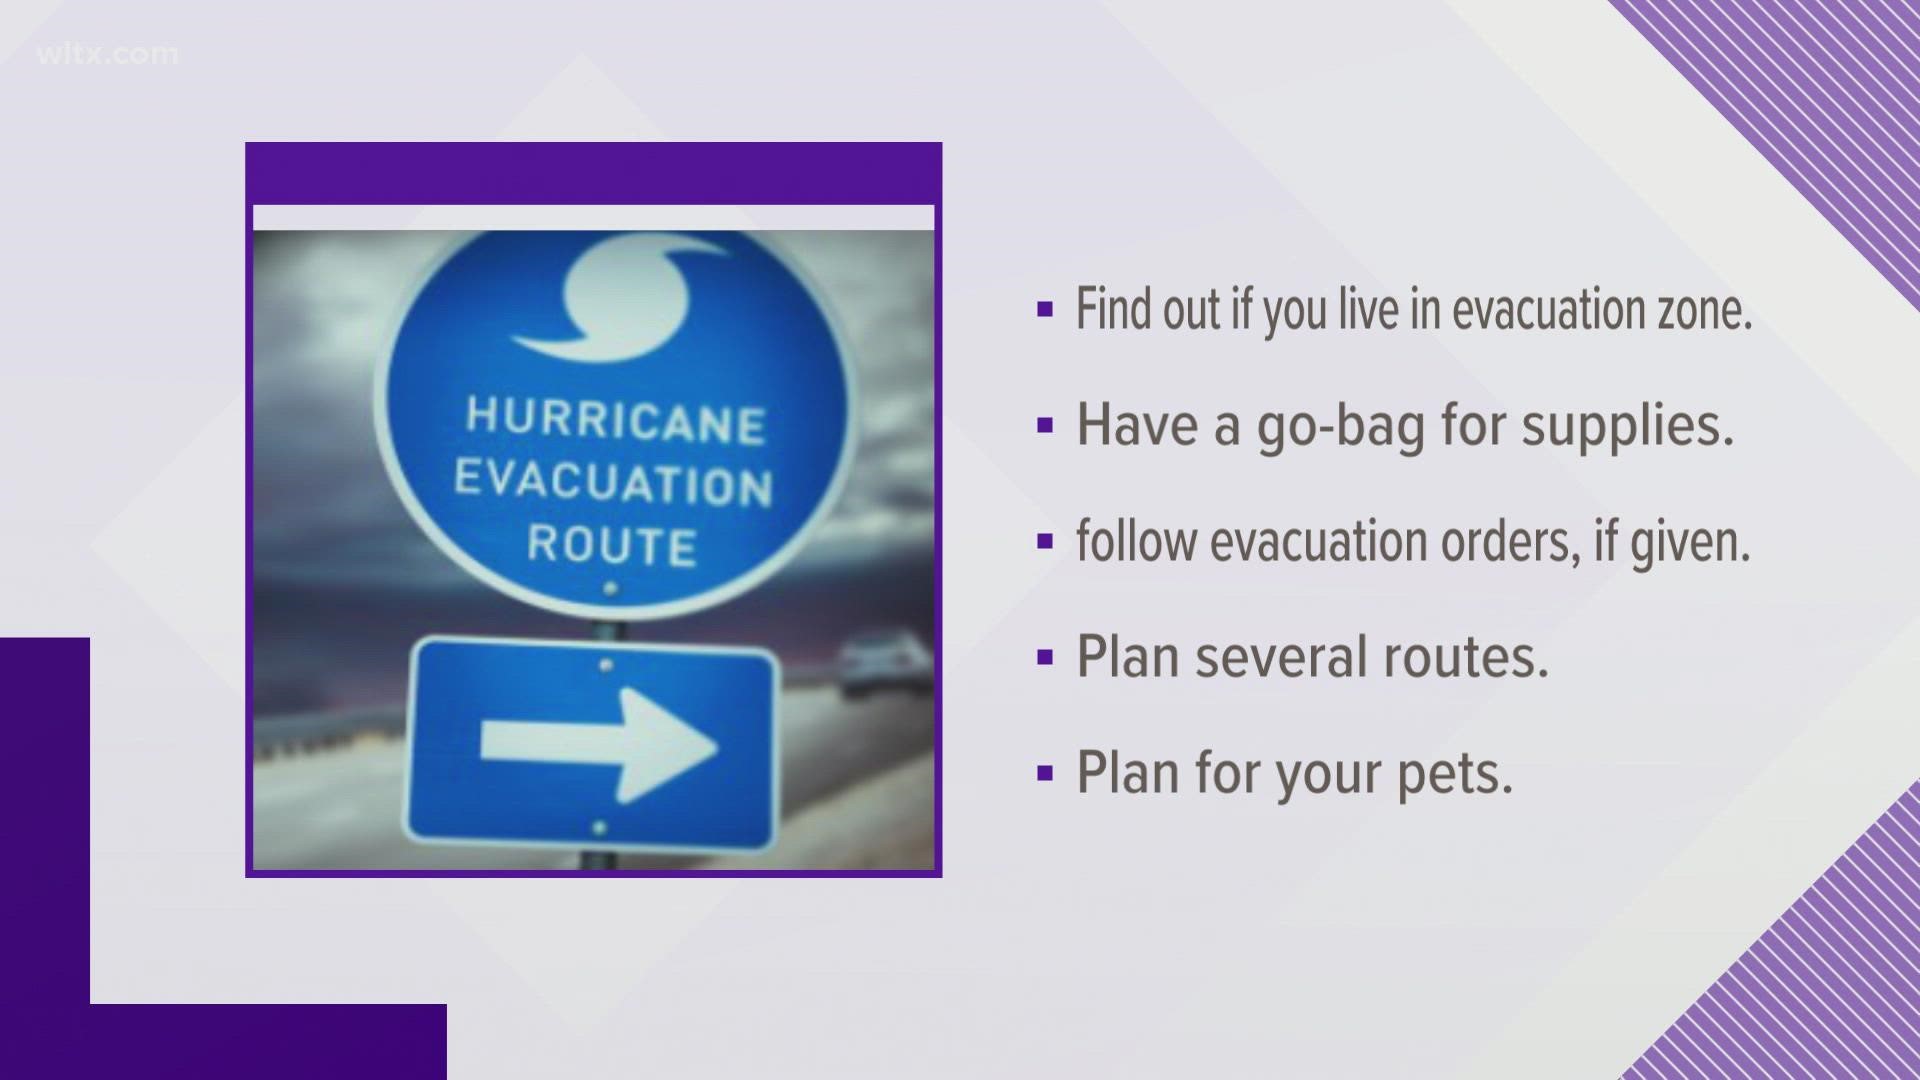 It's important that you know if you live in a hurricane evacuation zone or if you're in a home that would be unsafe during a hurricane.